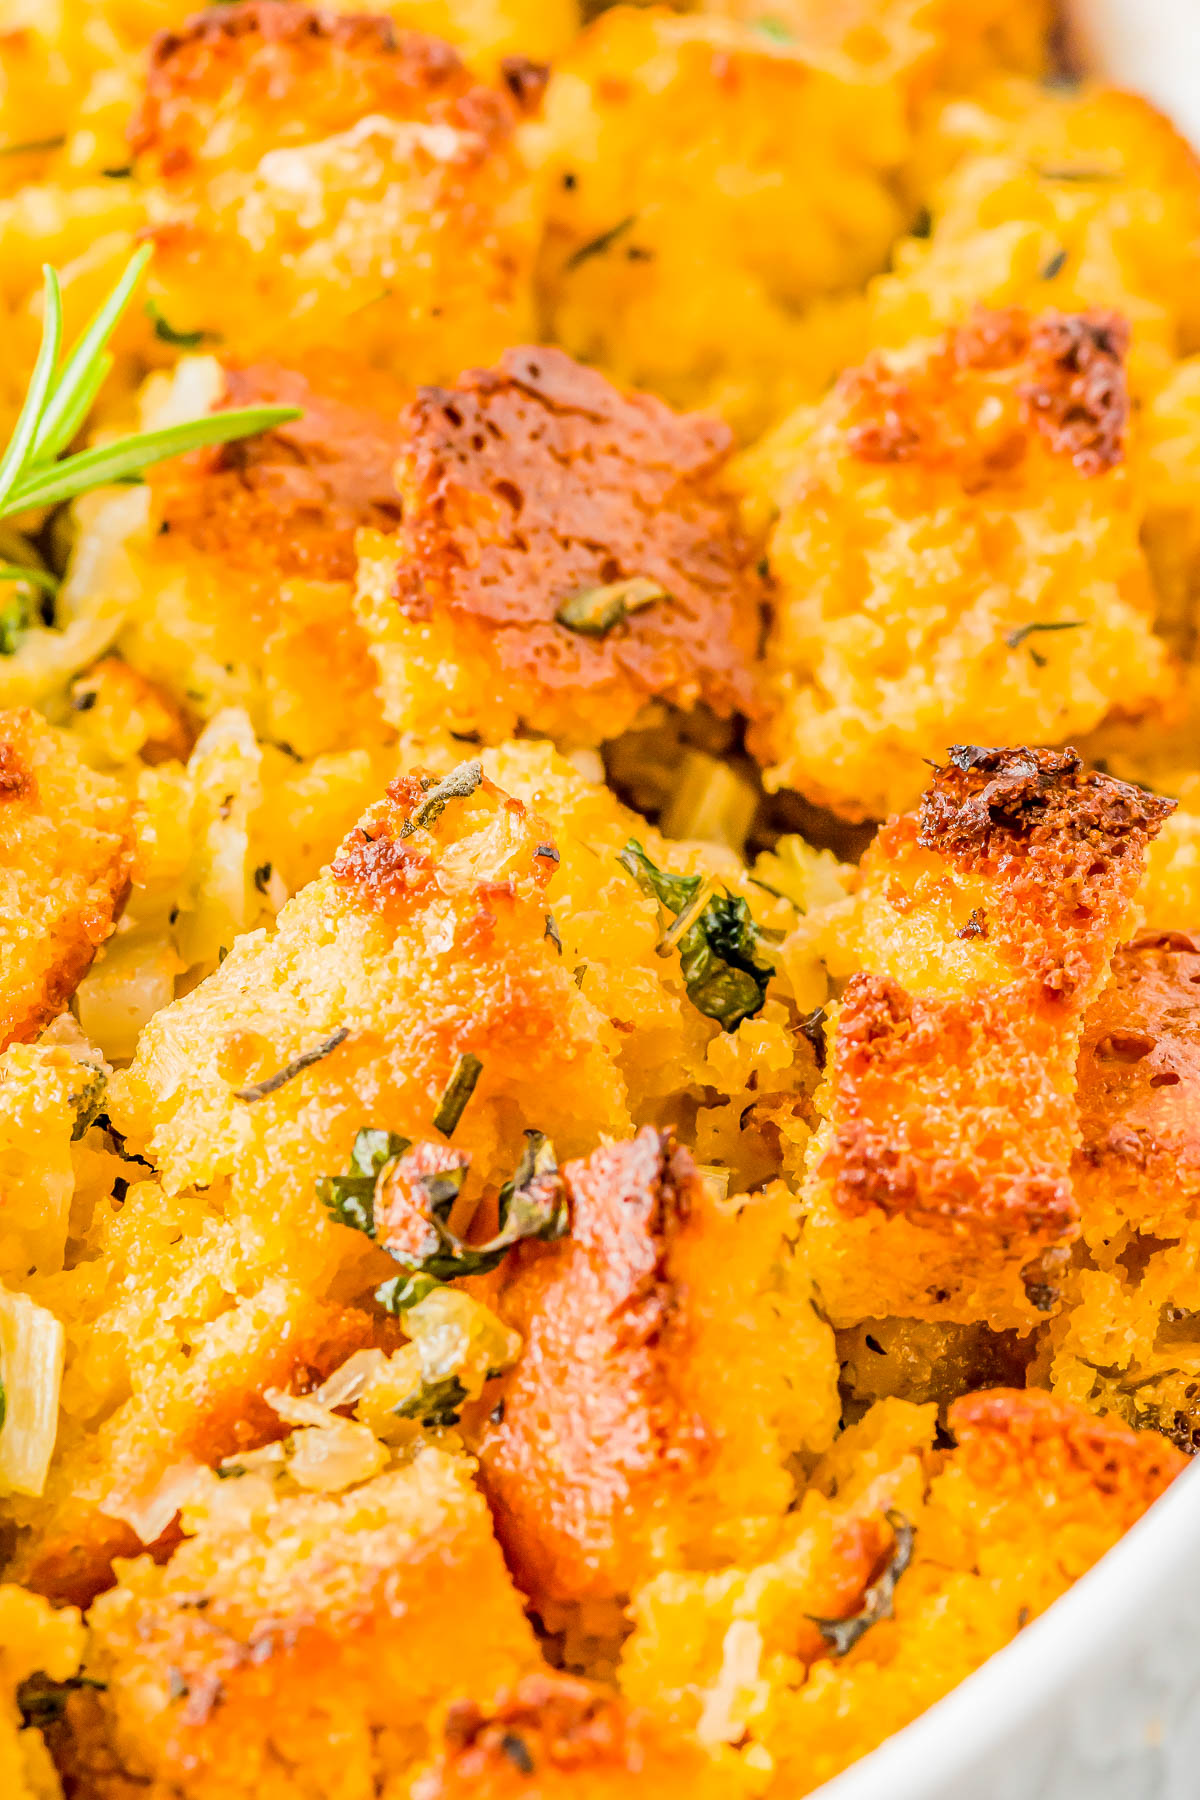 Cornbread Stuffing - Fast and easy homemade cornbread is transformed into a family favorite cornbread stuffing side dish with the addition of celery, onions, garlic, broth, and a bouquet of fresh herbs! Soft, tender, EASY, and sure to become a hit at your Thanksgiving and Christmas holiday celebrations! 